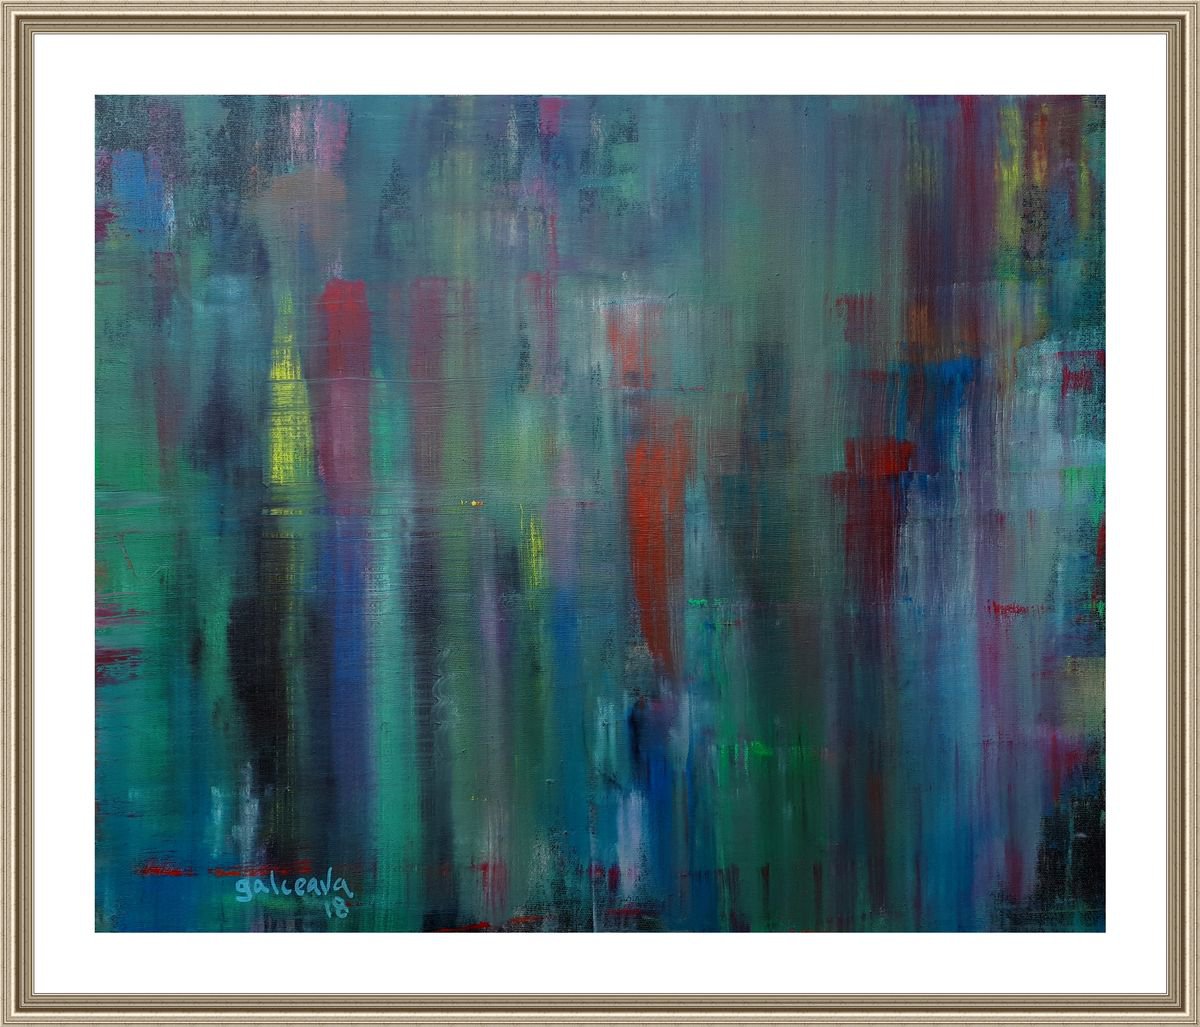 Cascading, Original Abstract Painting, dark colors blue and grays oil canvas by Constantin Galceava